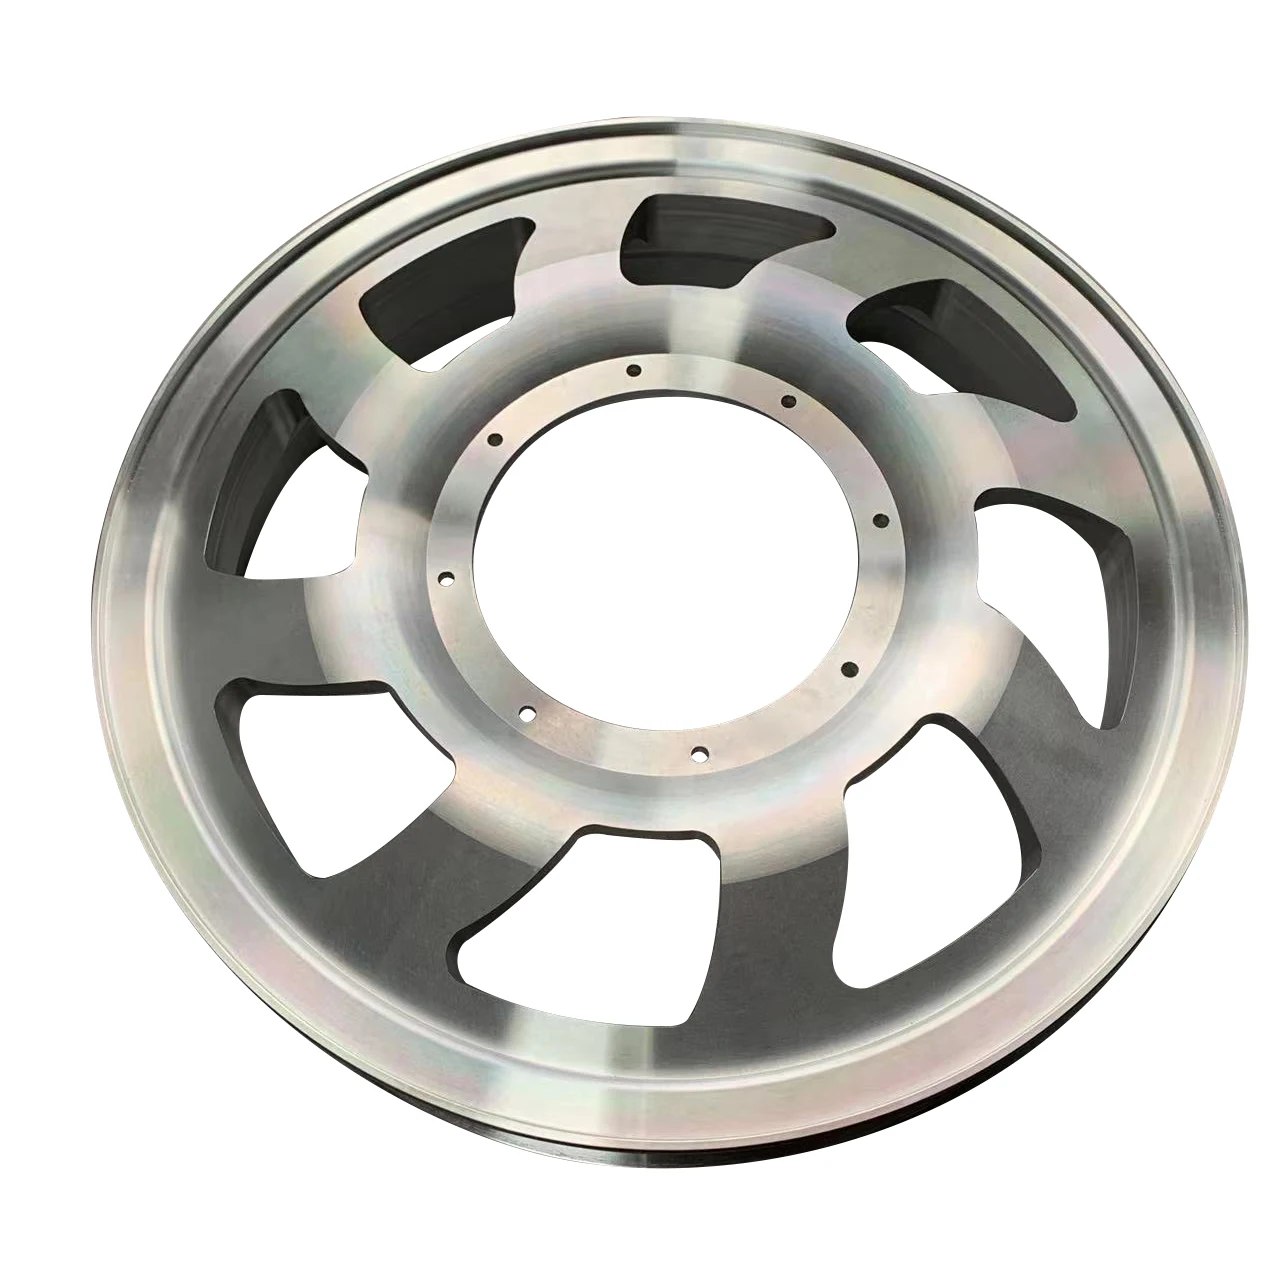 Custom high quality machined cnc aluminum anodized motorcycle front and rear wheels